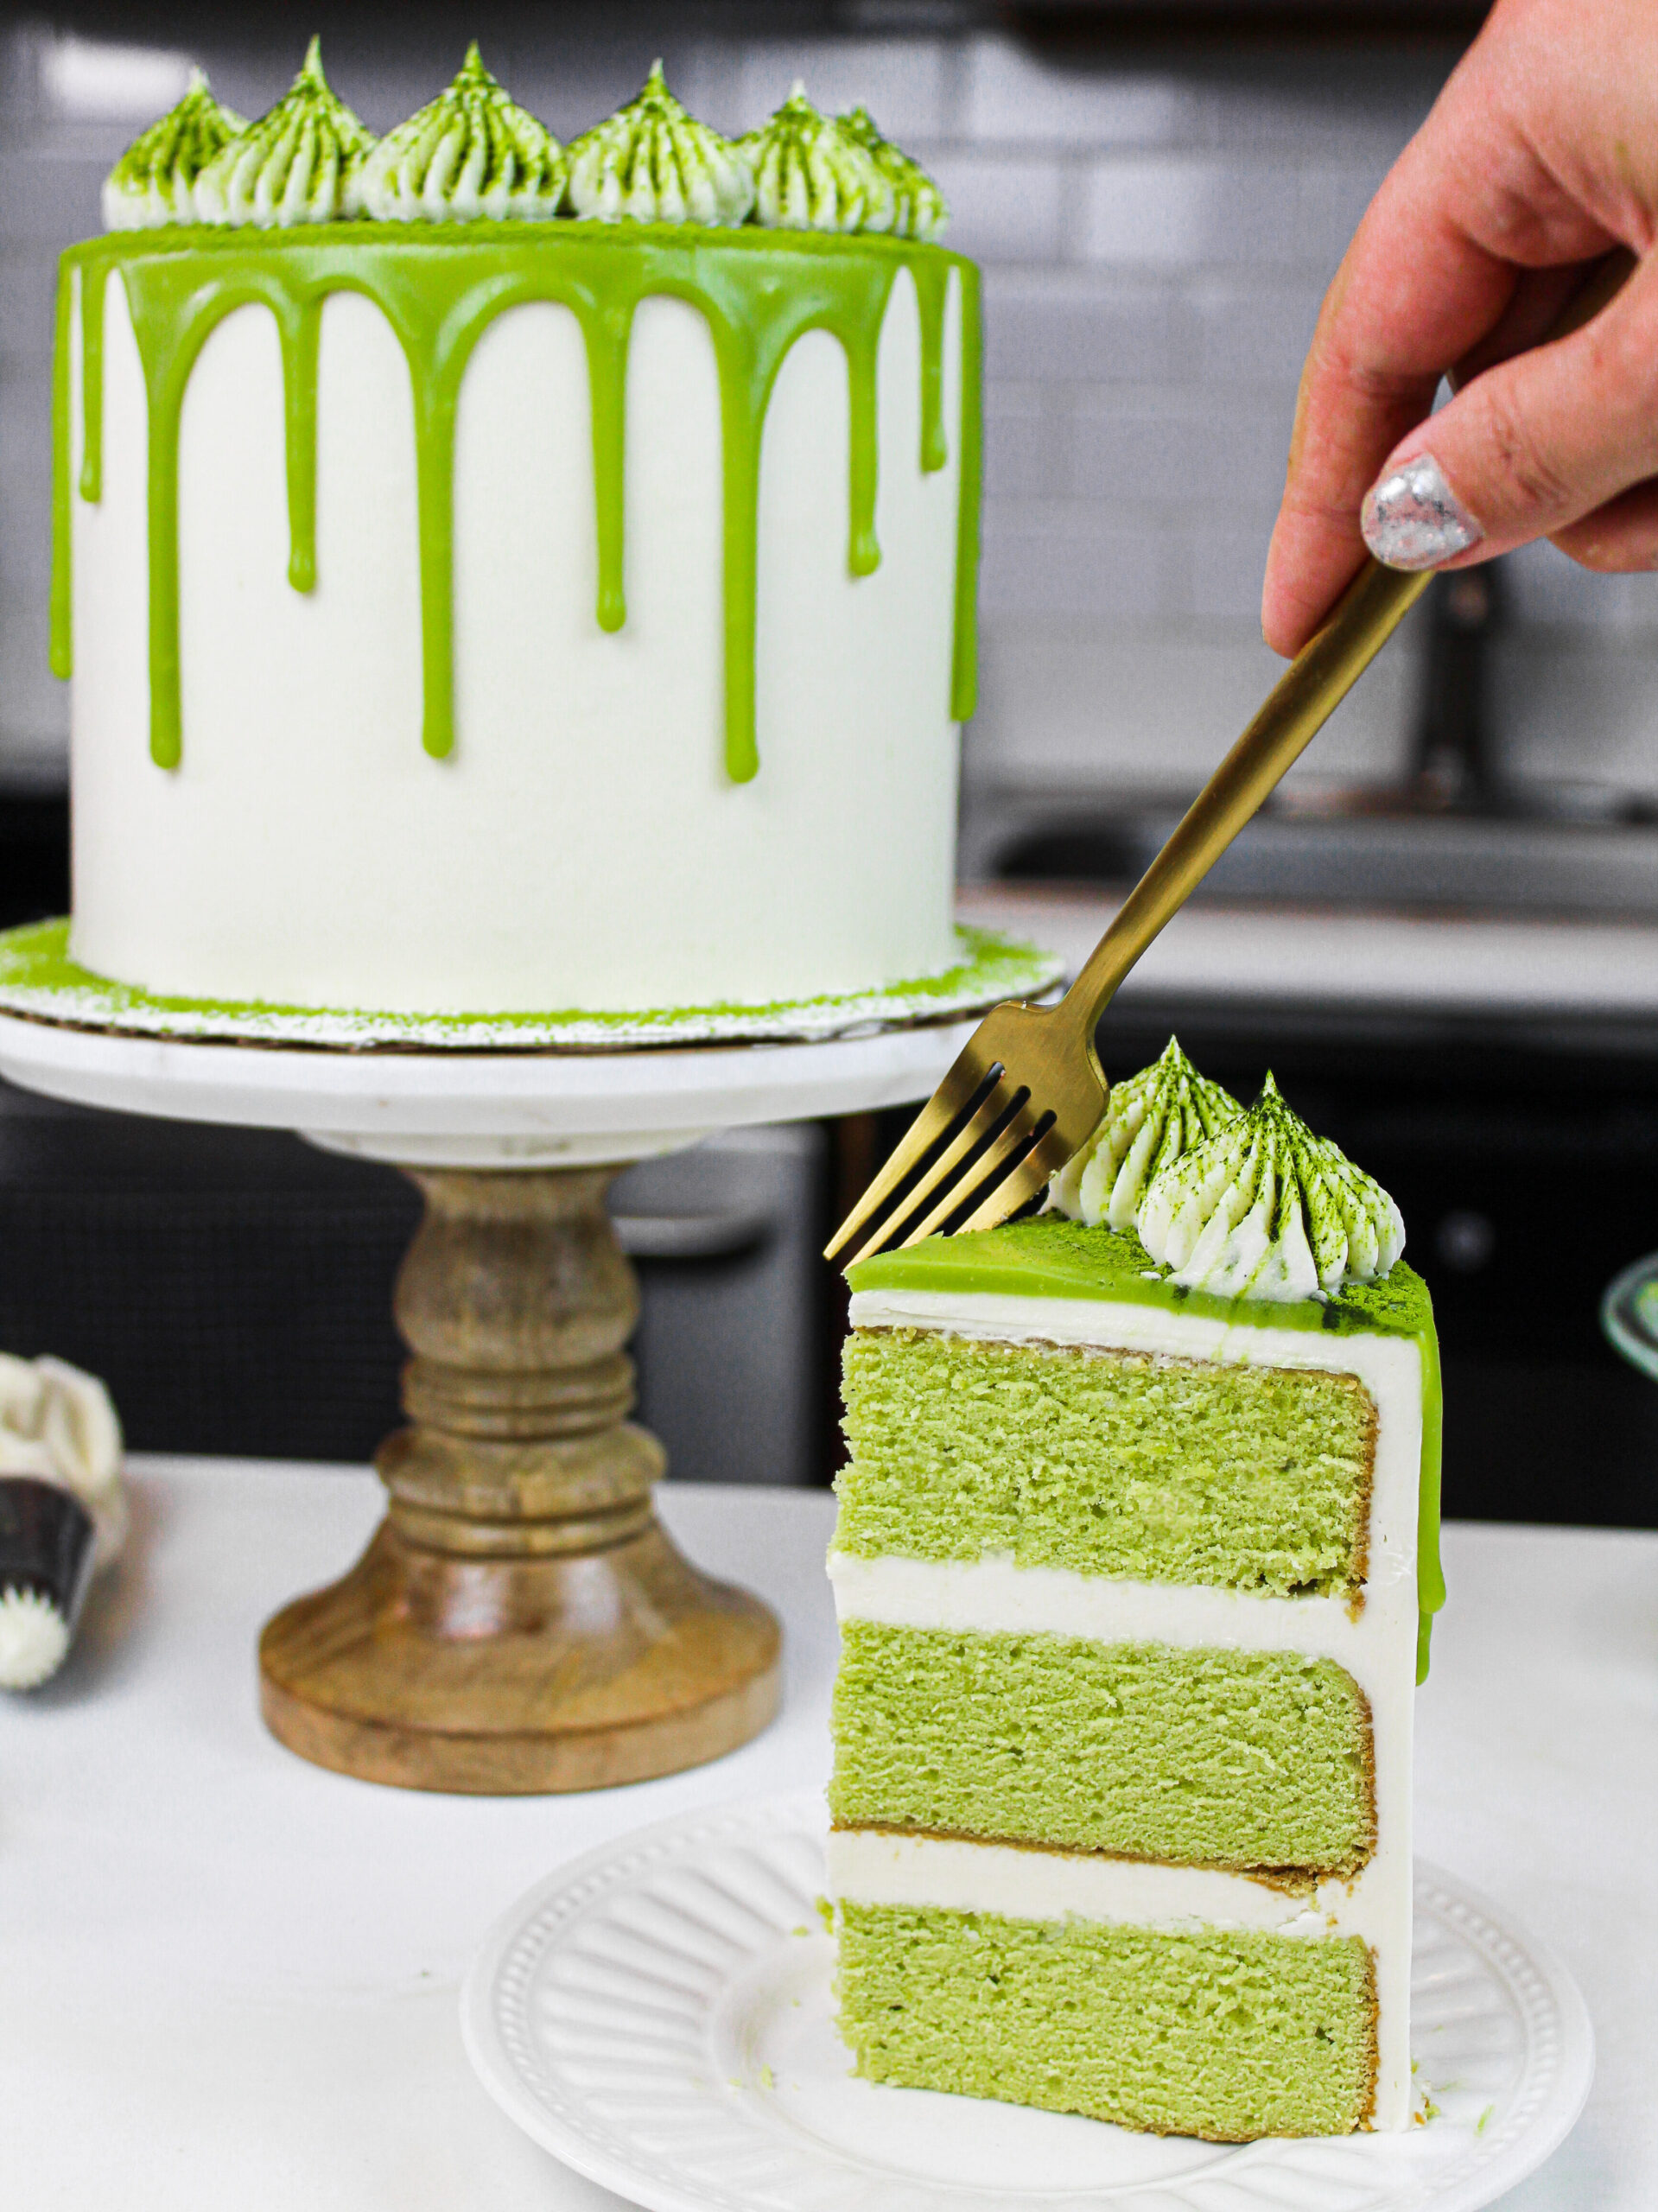 https://chelsweets.com/wp-content/uploads/2022/03/cake-slice-with-fork-edited-scaled.jpg